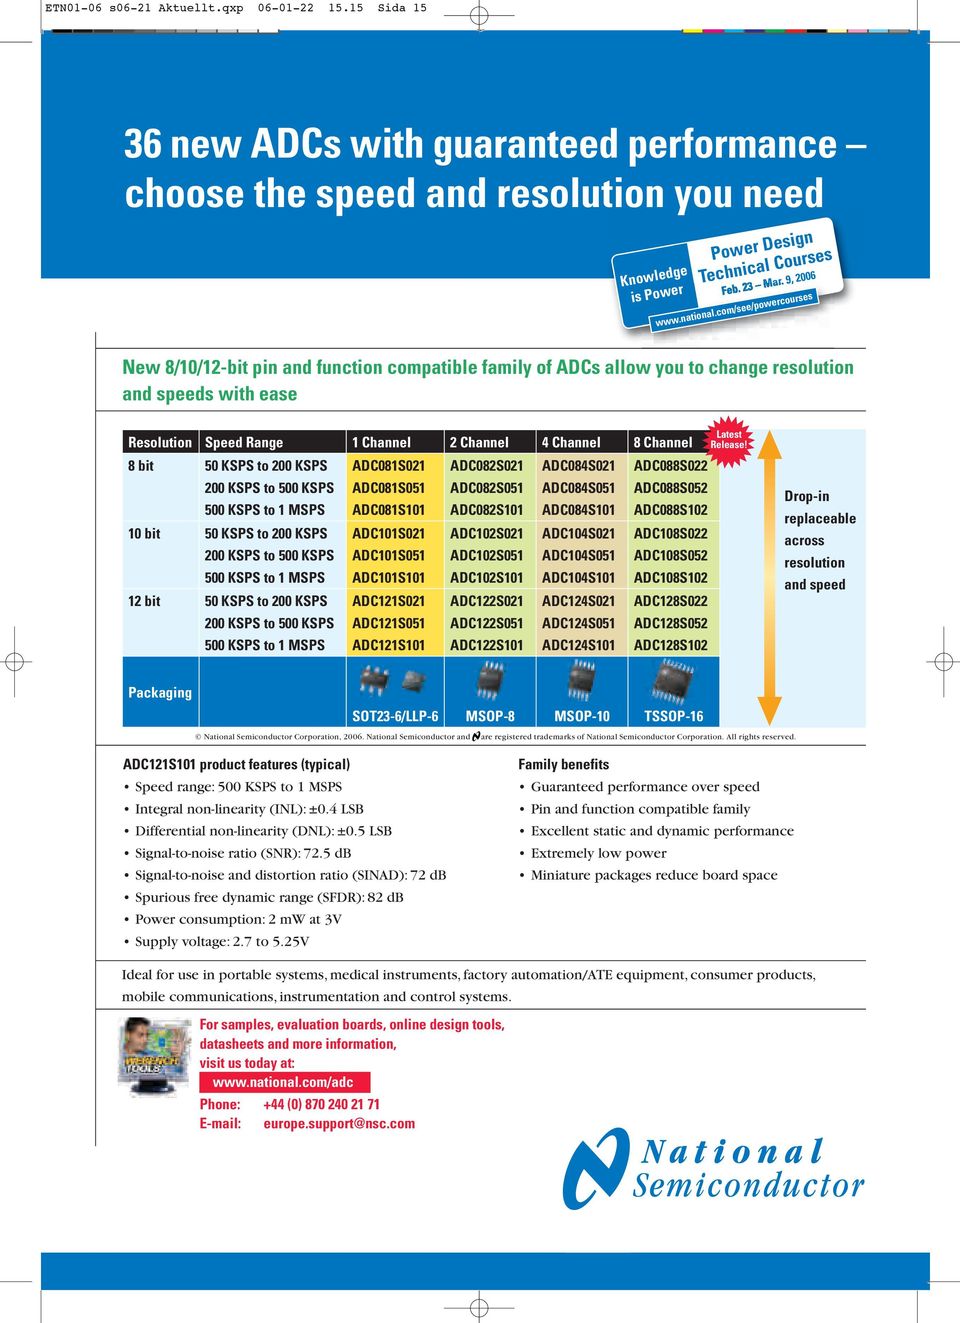 com/see/powercourses New 8/10/12-bit pin and function compatible family of ADCs allow you to change resolution and speeds with ease ResolutionSpeed Range1 Channel2 Channel4 Channel8 Channel 8 bit 50